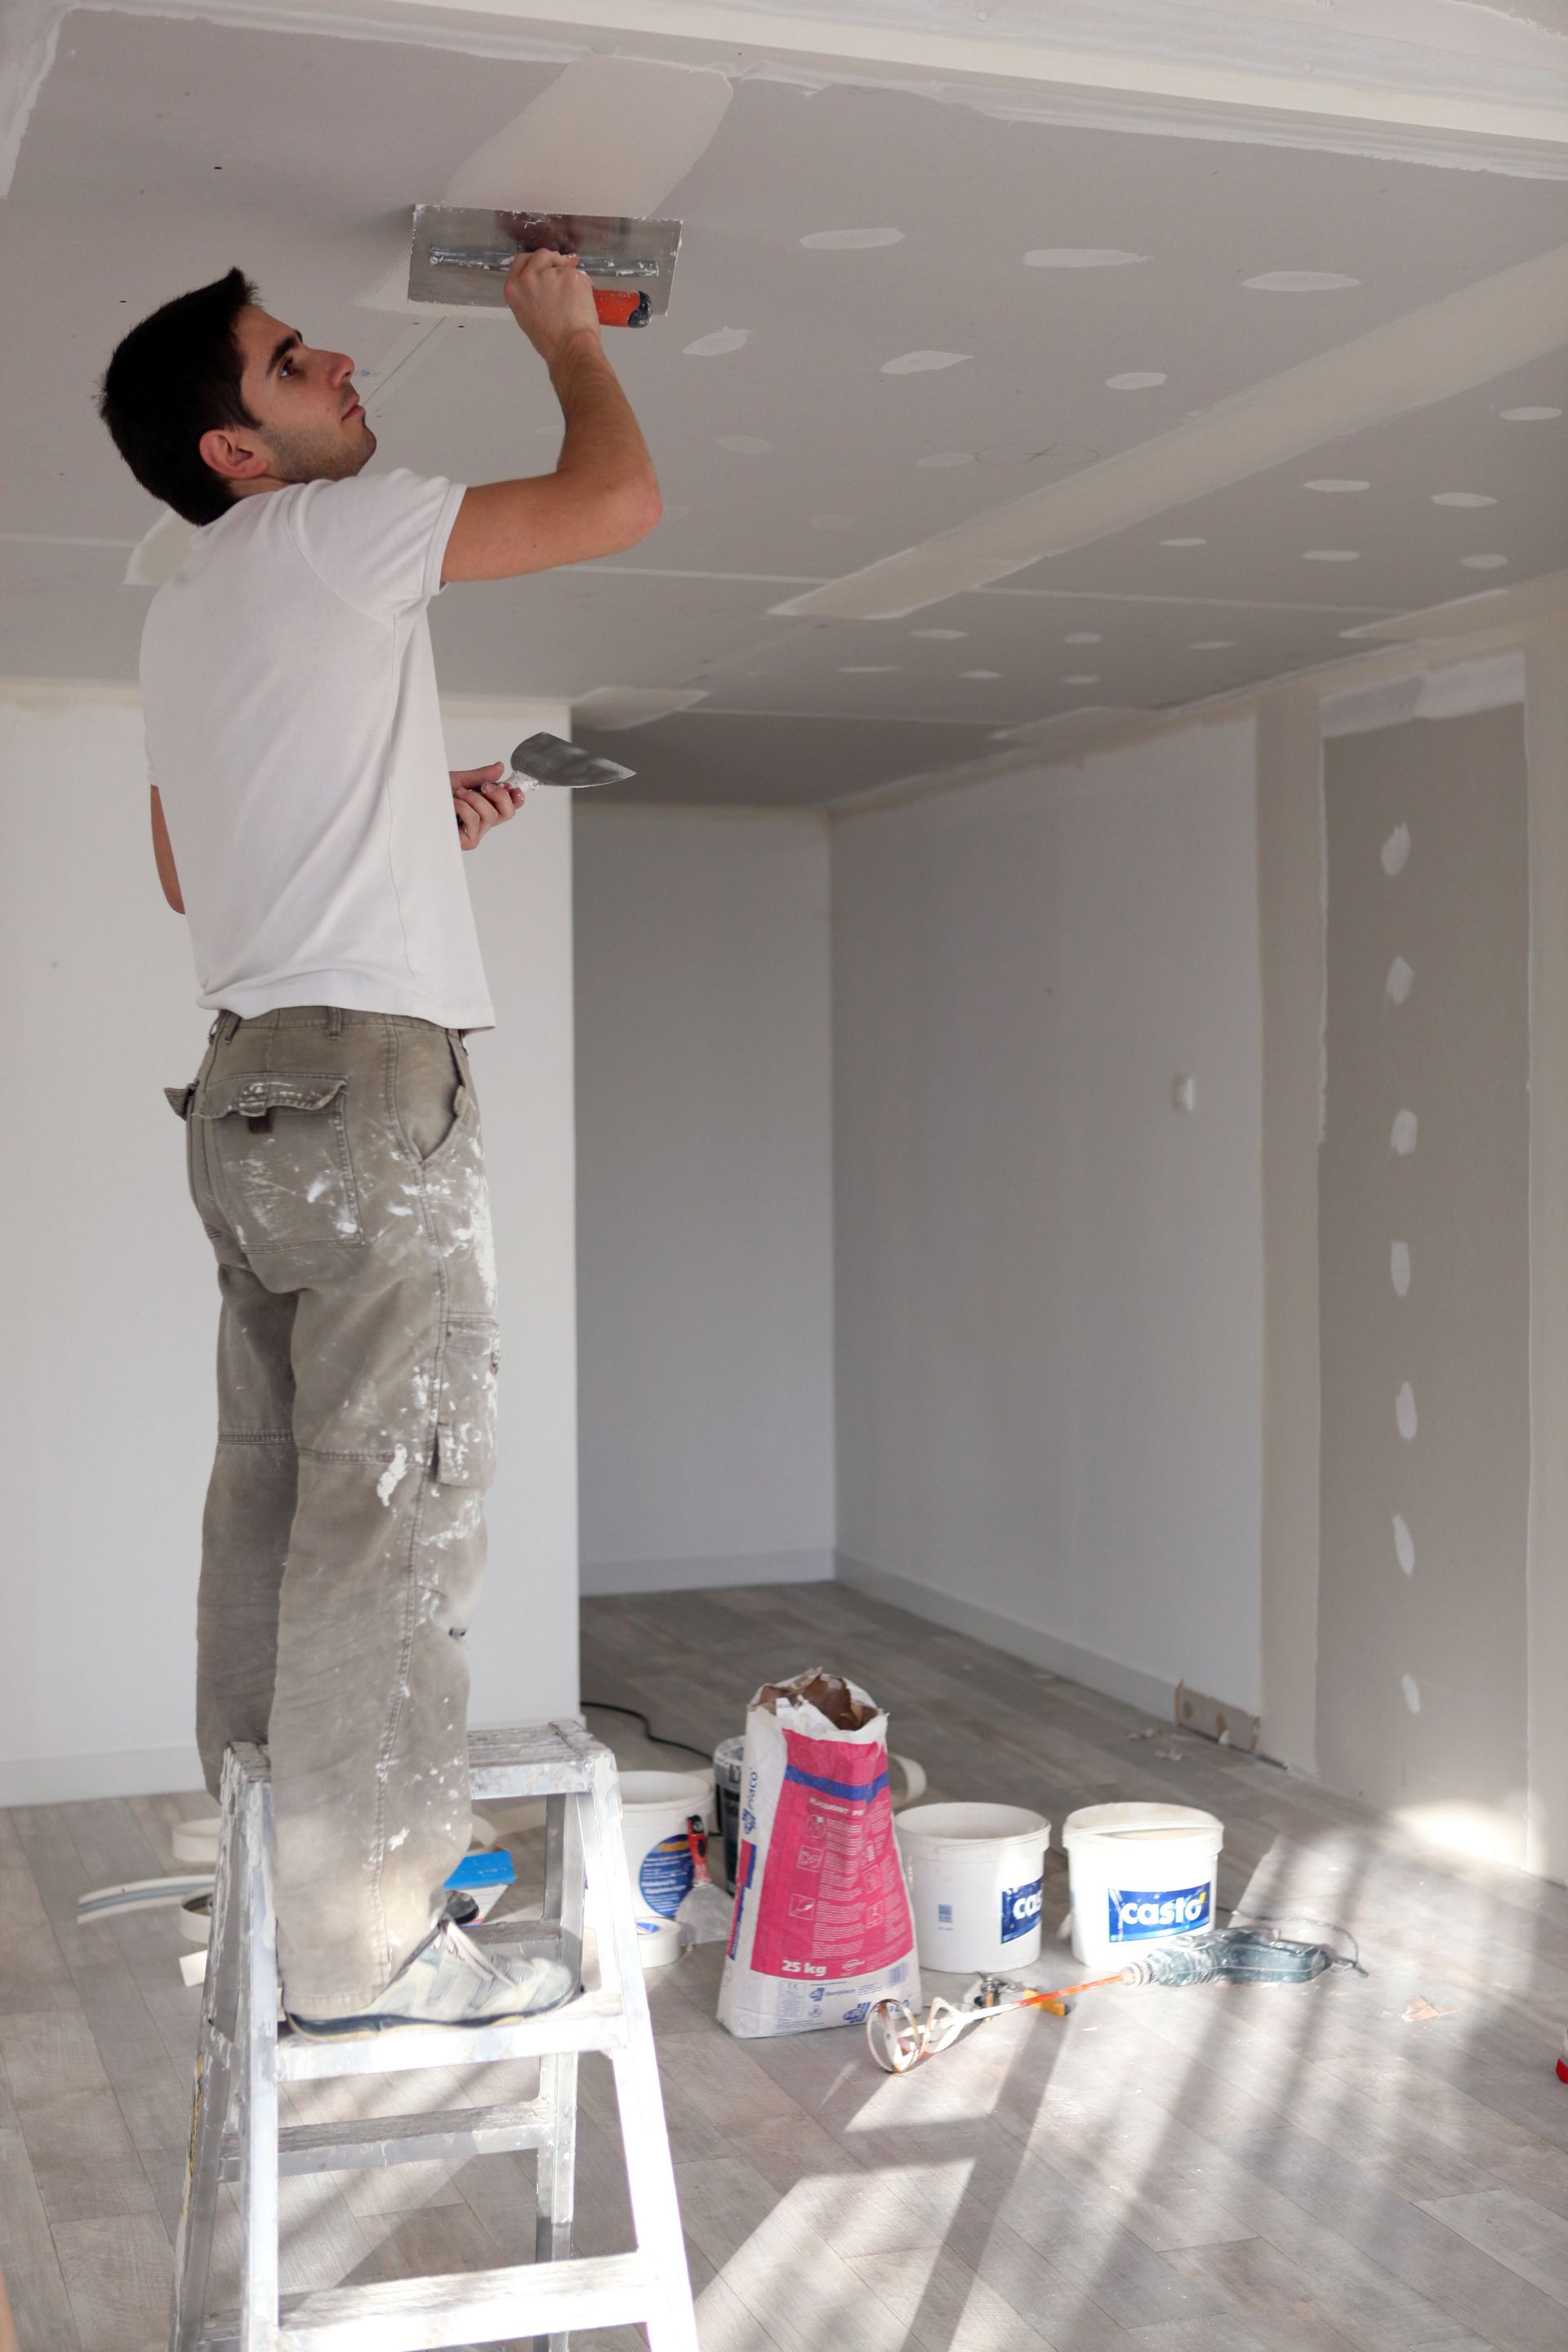 a man is standing on a ladder painting a ceiling .